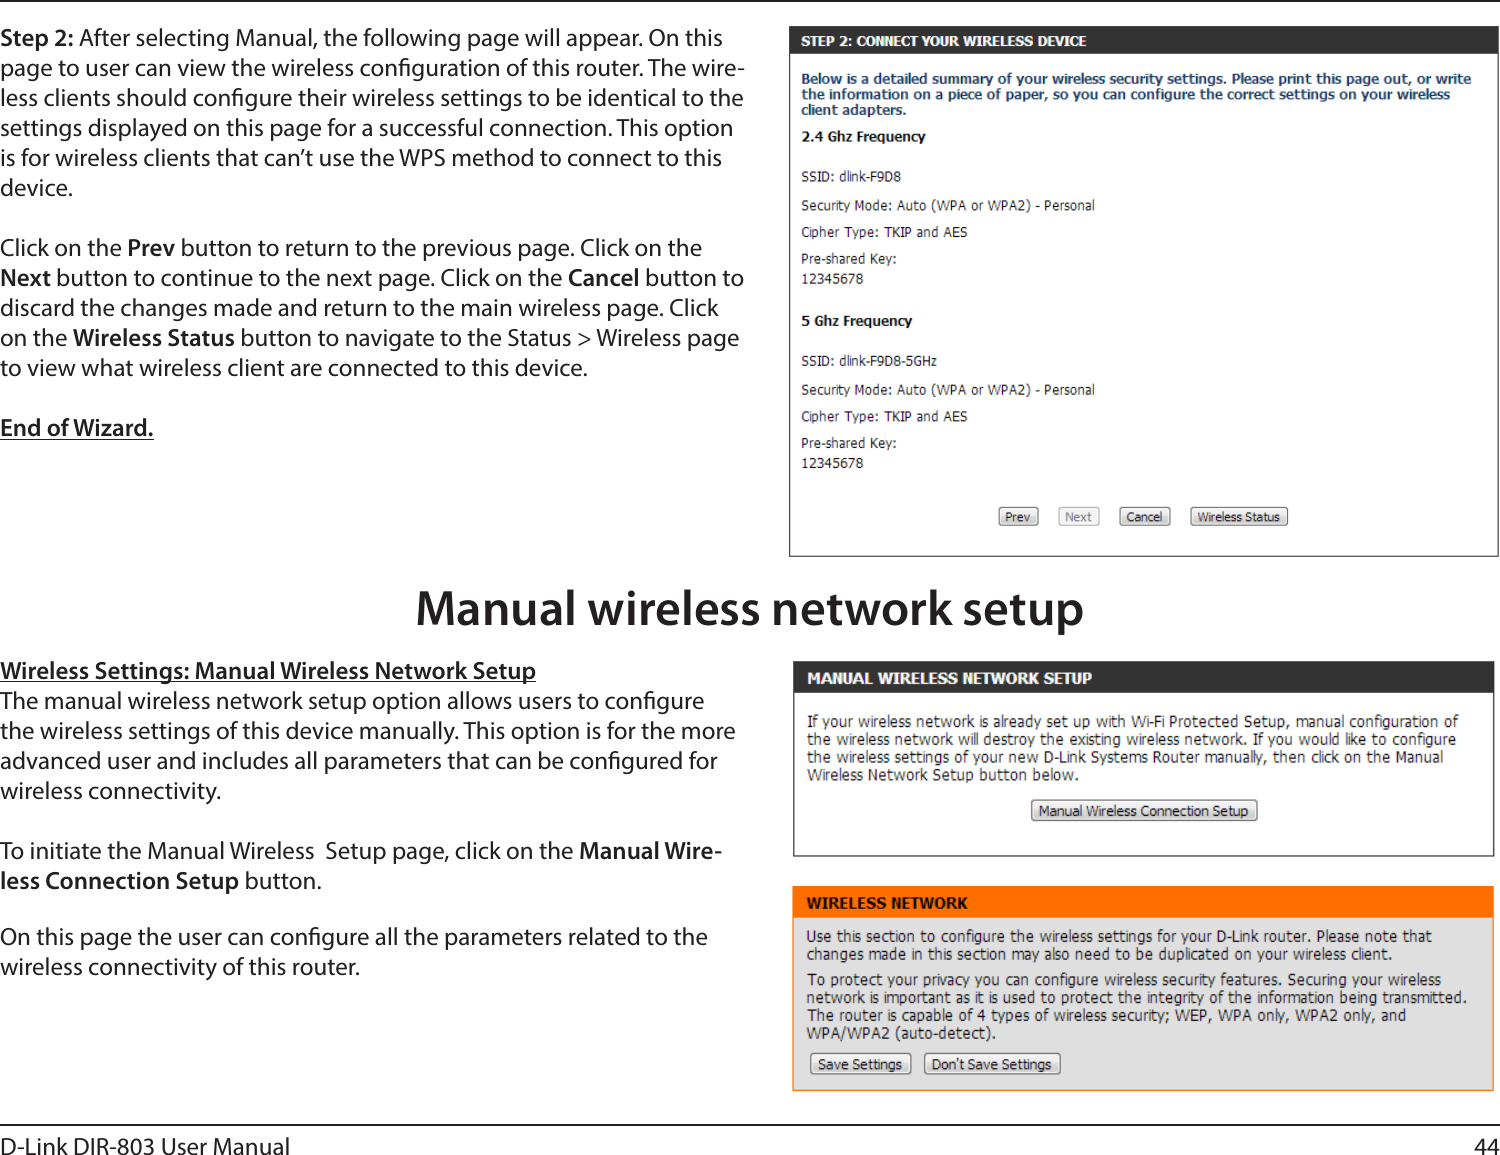 44D-Link DIR-803 User ManualStep 2: After selecting Manual, the following page will appear. On this page to user can view the wireless conguration of this router. The wire-less clients should congure their wireless settings to be identical to the settings displayed on this page for a successful connection. This option is for wireless clients that can’t use the WPS method to connect to this device.Click on the Prev button to return to the previous page. Click on the Next button to continue to the next page. Click on the Cancel button to discard the changes made and return to the main wireless page. Click on the Wireless Status button to navigate to the Status &gt; Wireless page to view what wireless client are connected to this device.End of Wizard.Wireless Settings: Manual Wireless Network SetupThe manual wireless network setup option allows users to congure the wireless settings of this device manually. This option is for the more advanced user and includes all parameters that can be congured for wireless connectivity.To initiate the Manual Wireless  Setup page, click on the Manual Wire-less Connection Setup button.On this page the user can congure all the parameters related to the wireless connectivity of this router.Manual wireless network setup